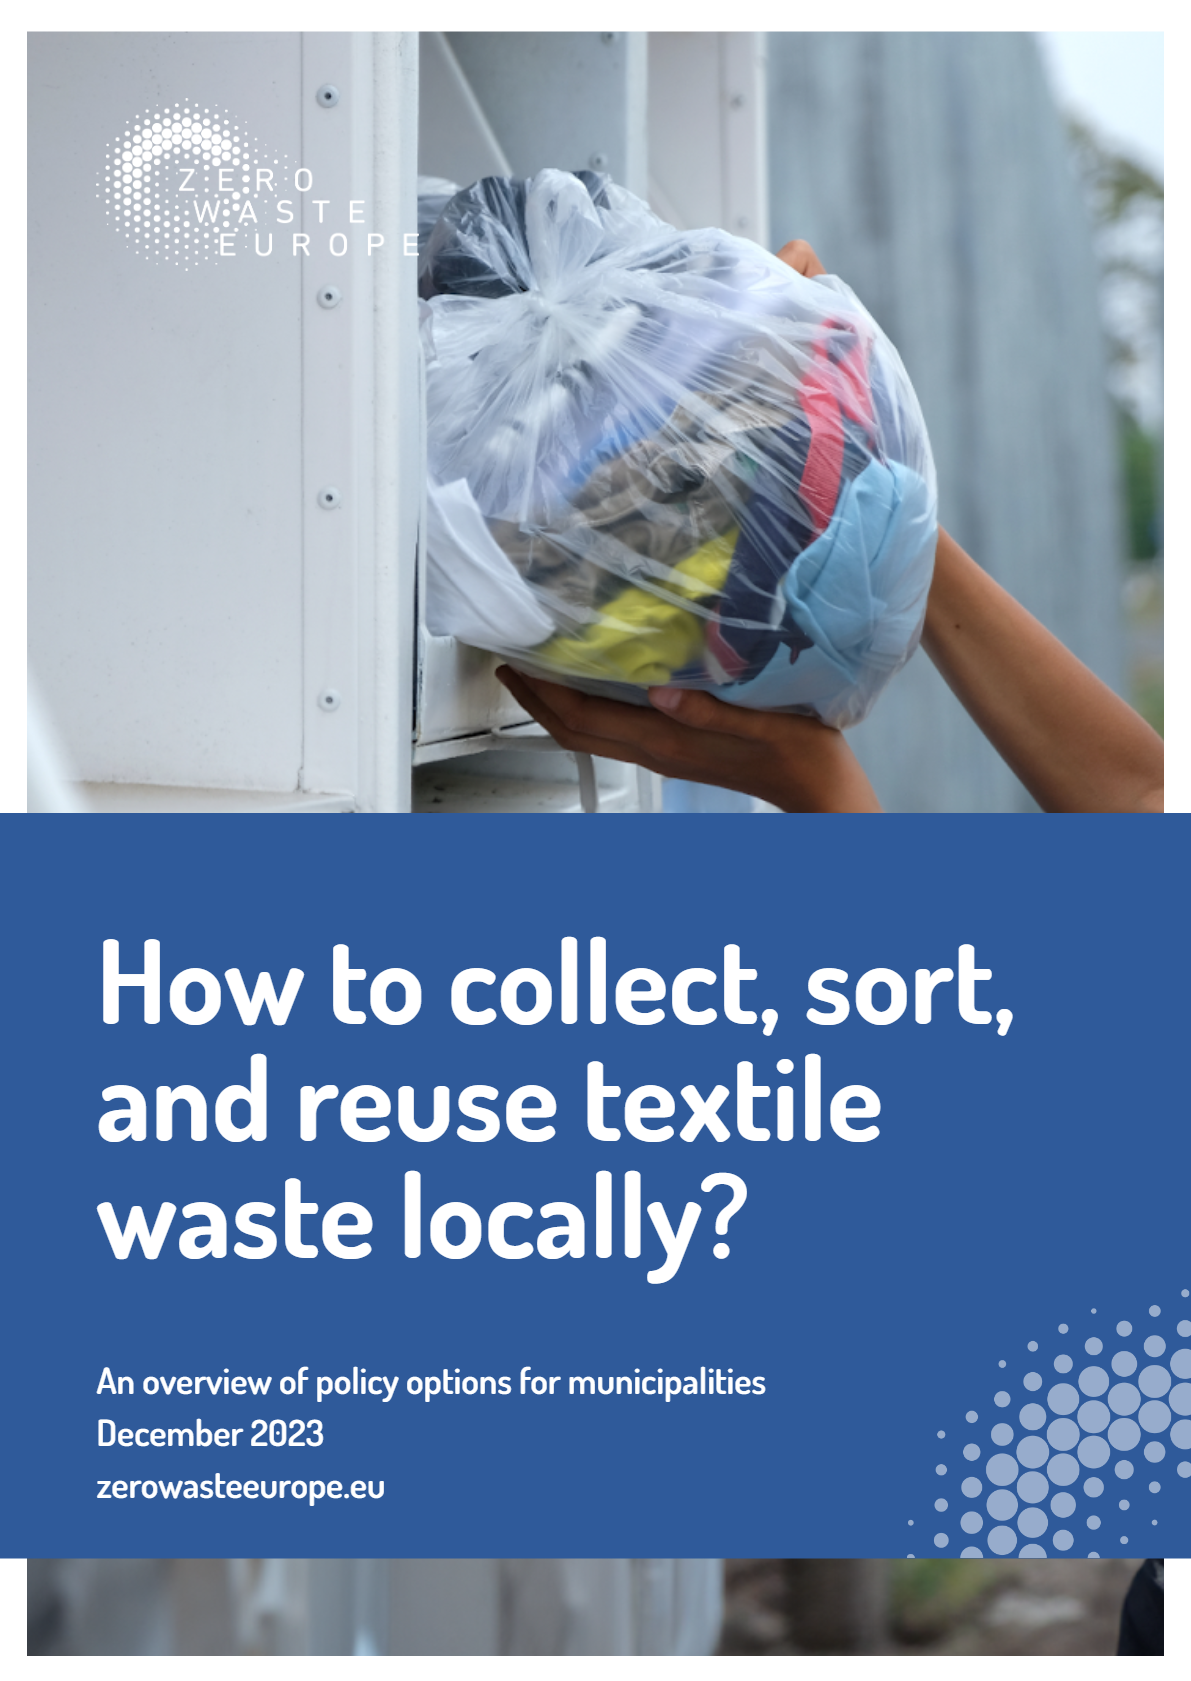 How to collect, sort, and reuse textile waste locally?